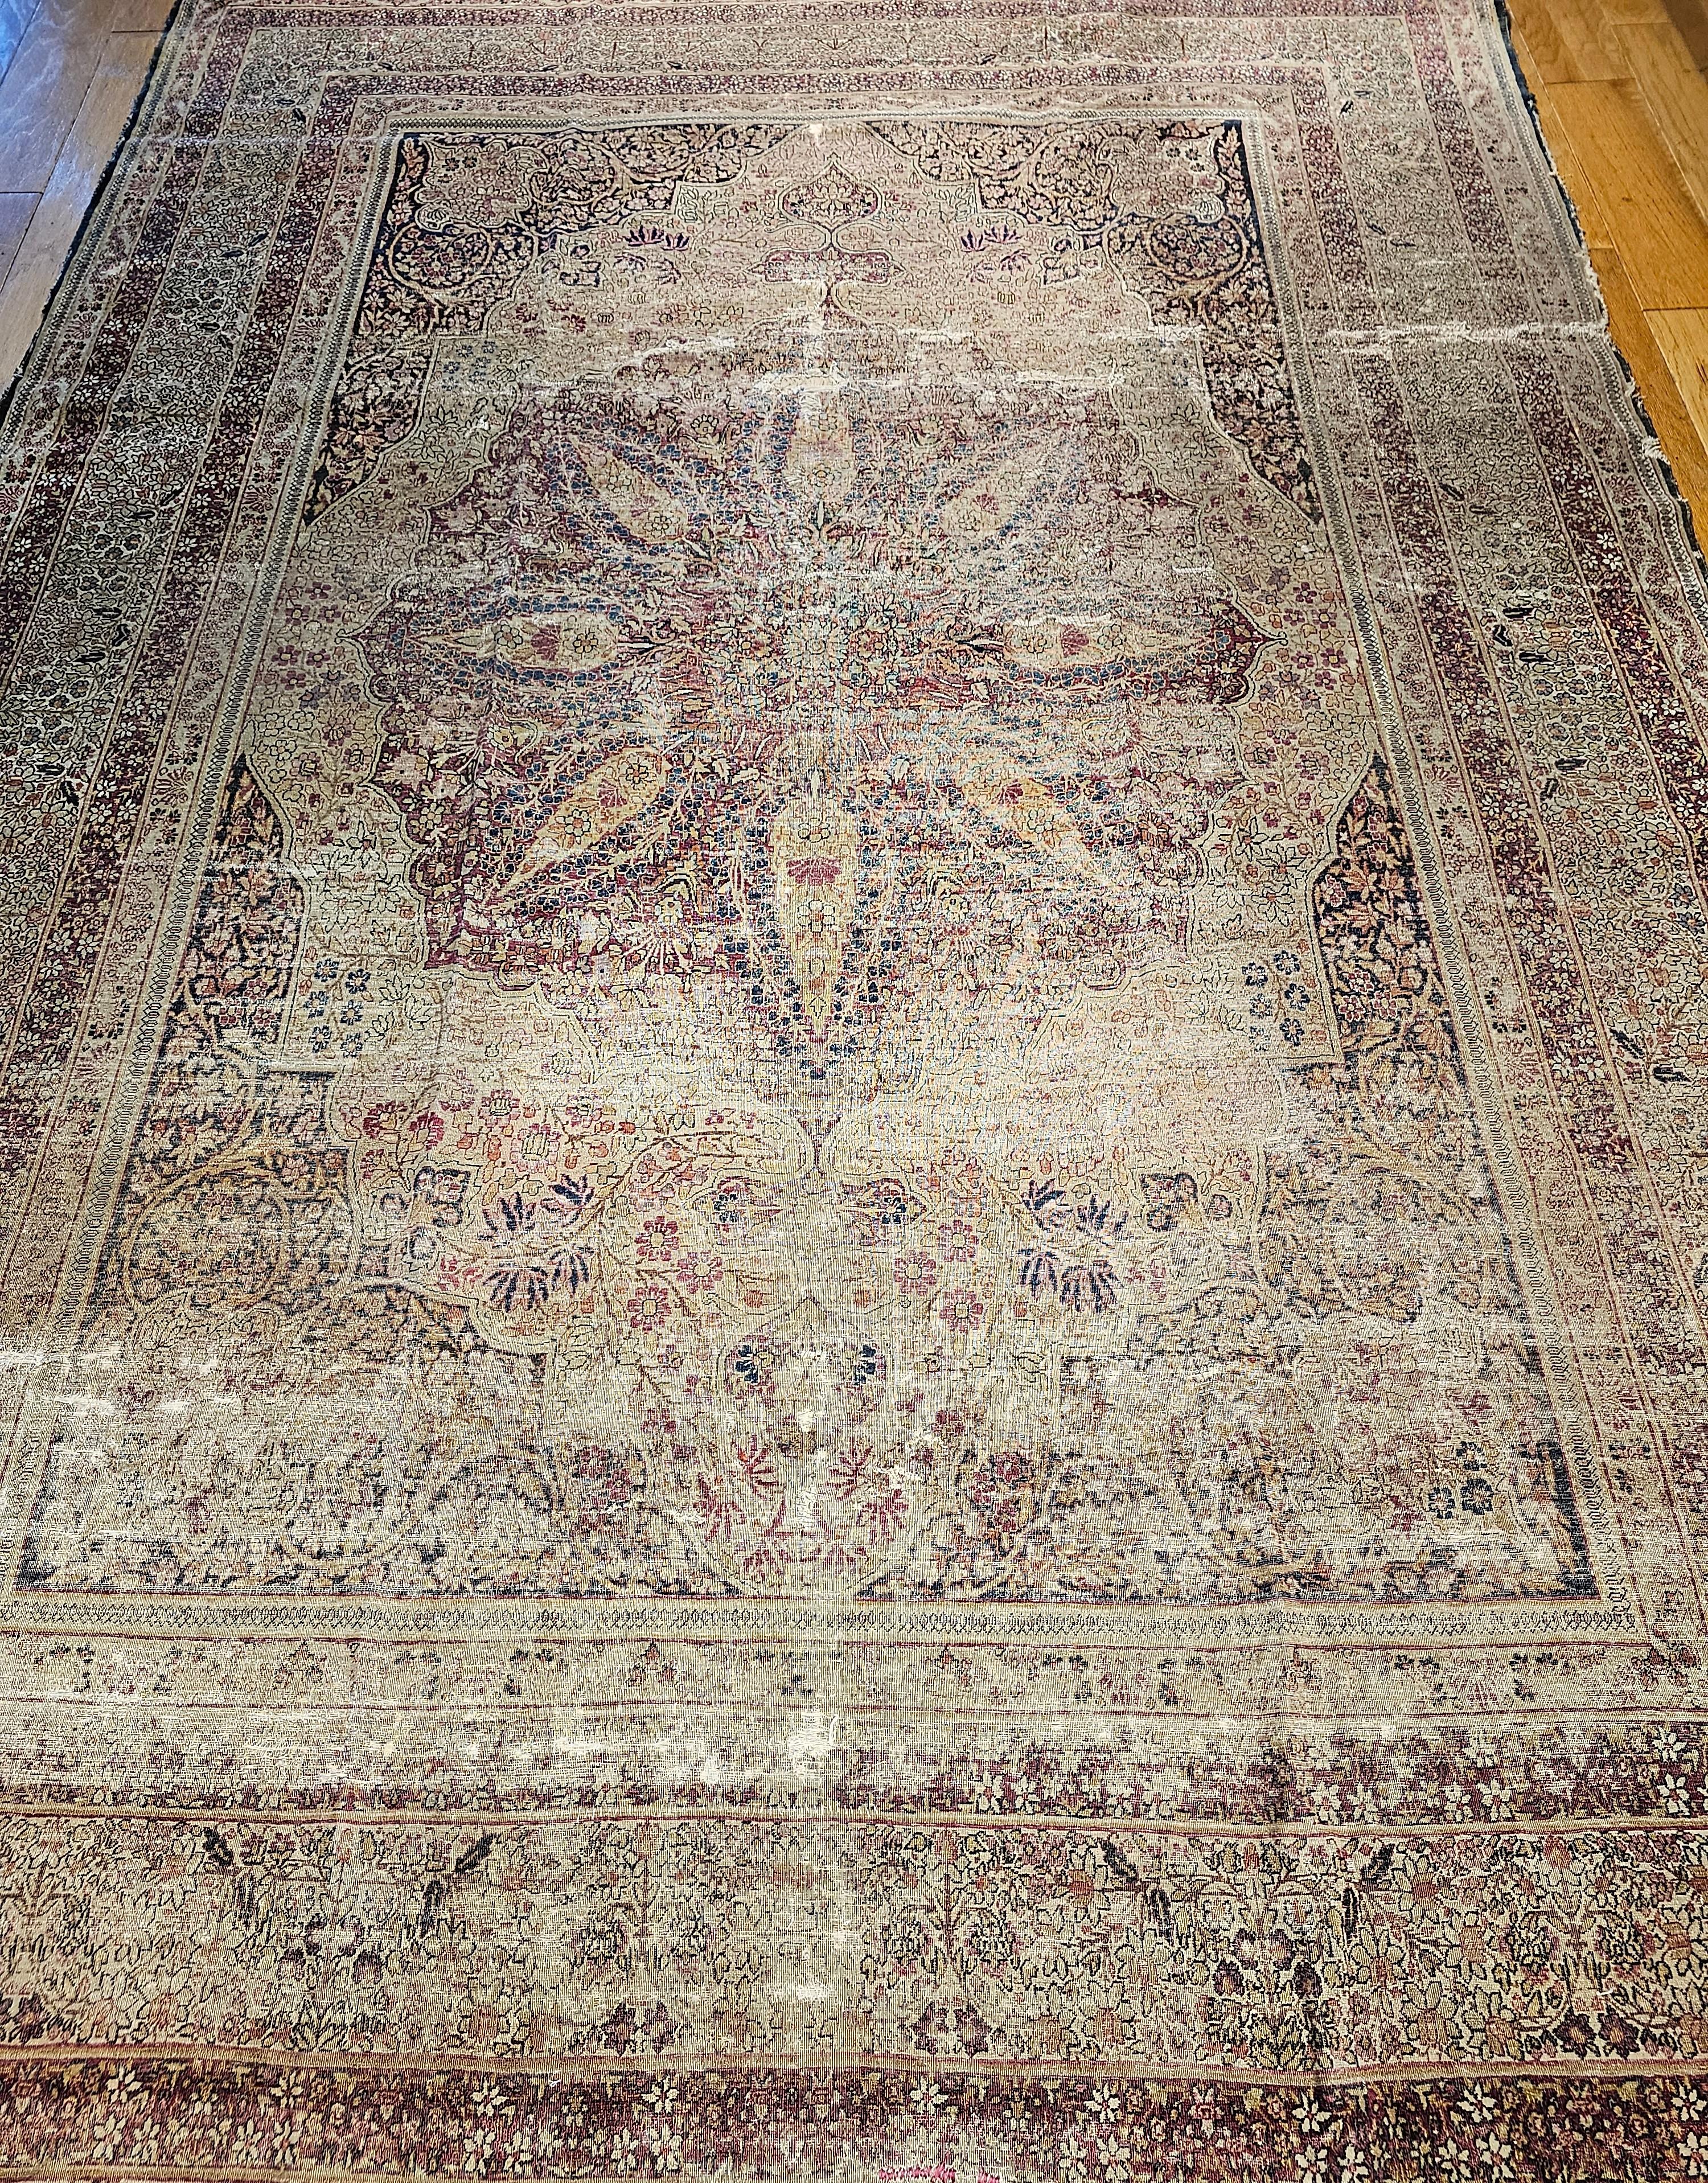  Beautiful Persian Kerman Lavar from the late 1800s in wonderful colors and design.   The rug has a 